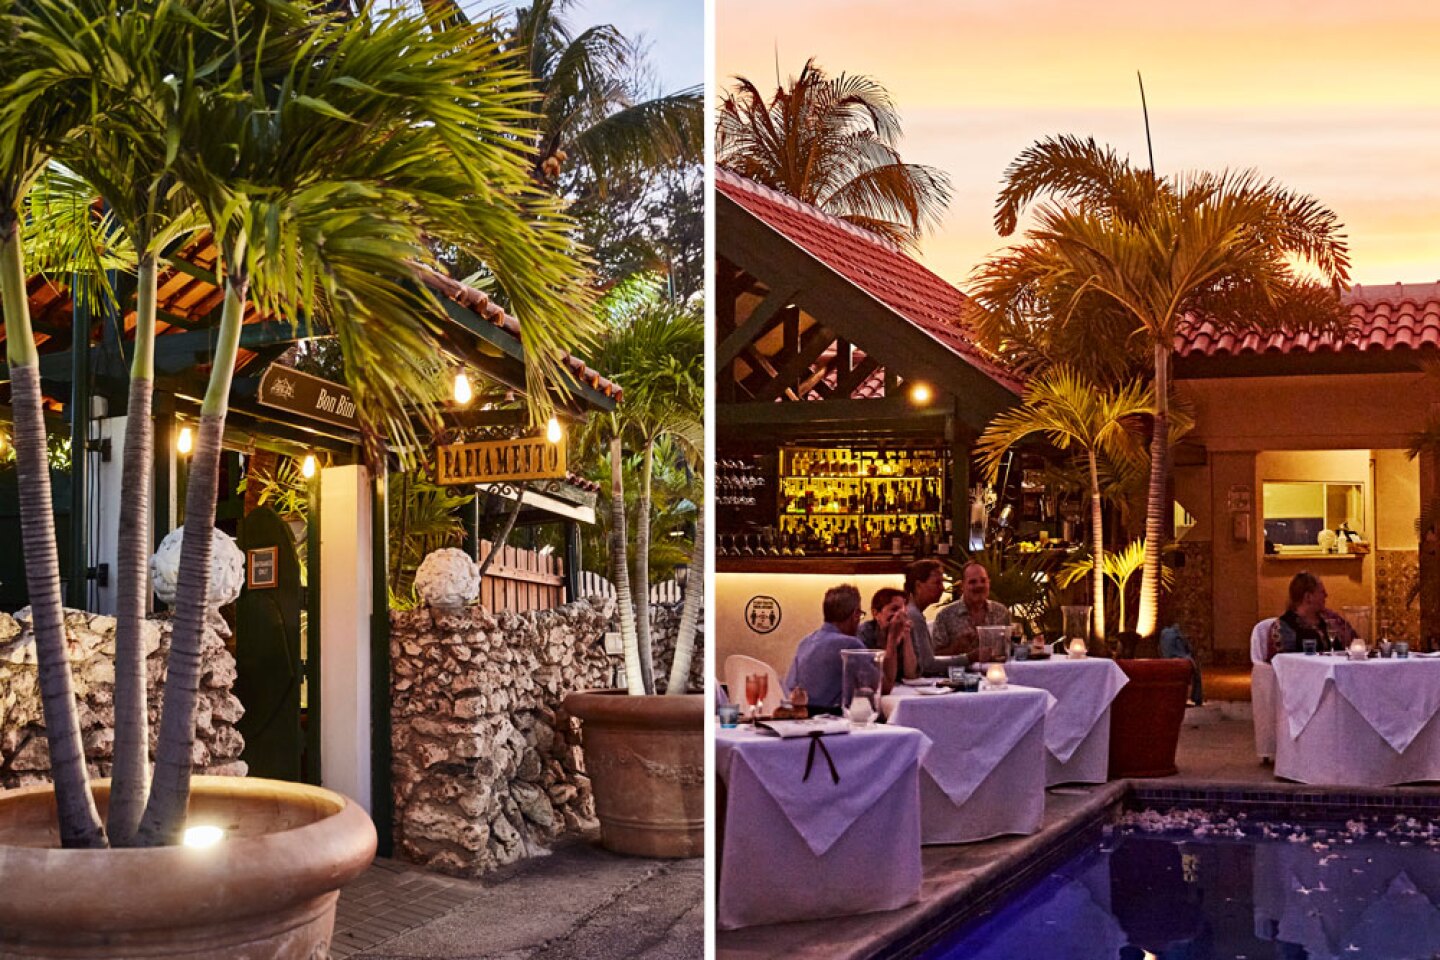 <a>At Papiamento, you can dine poolside on authentic Aruban dishes like keshi yena, or stuffed cheese.</a>